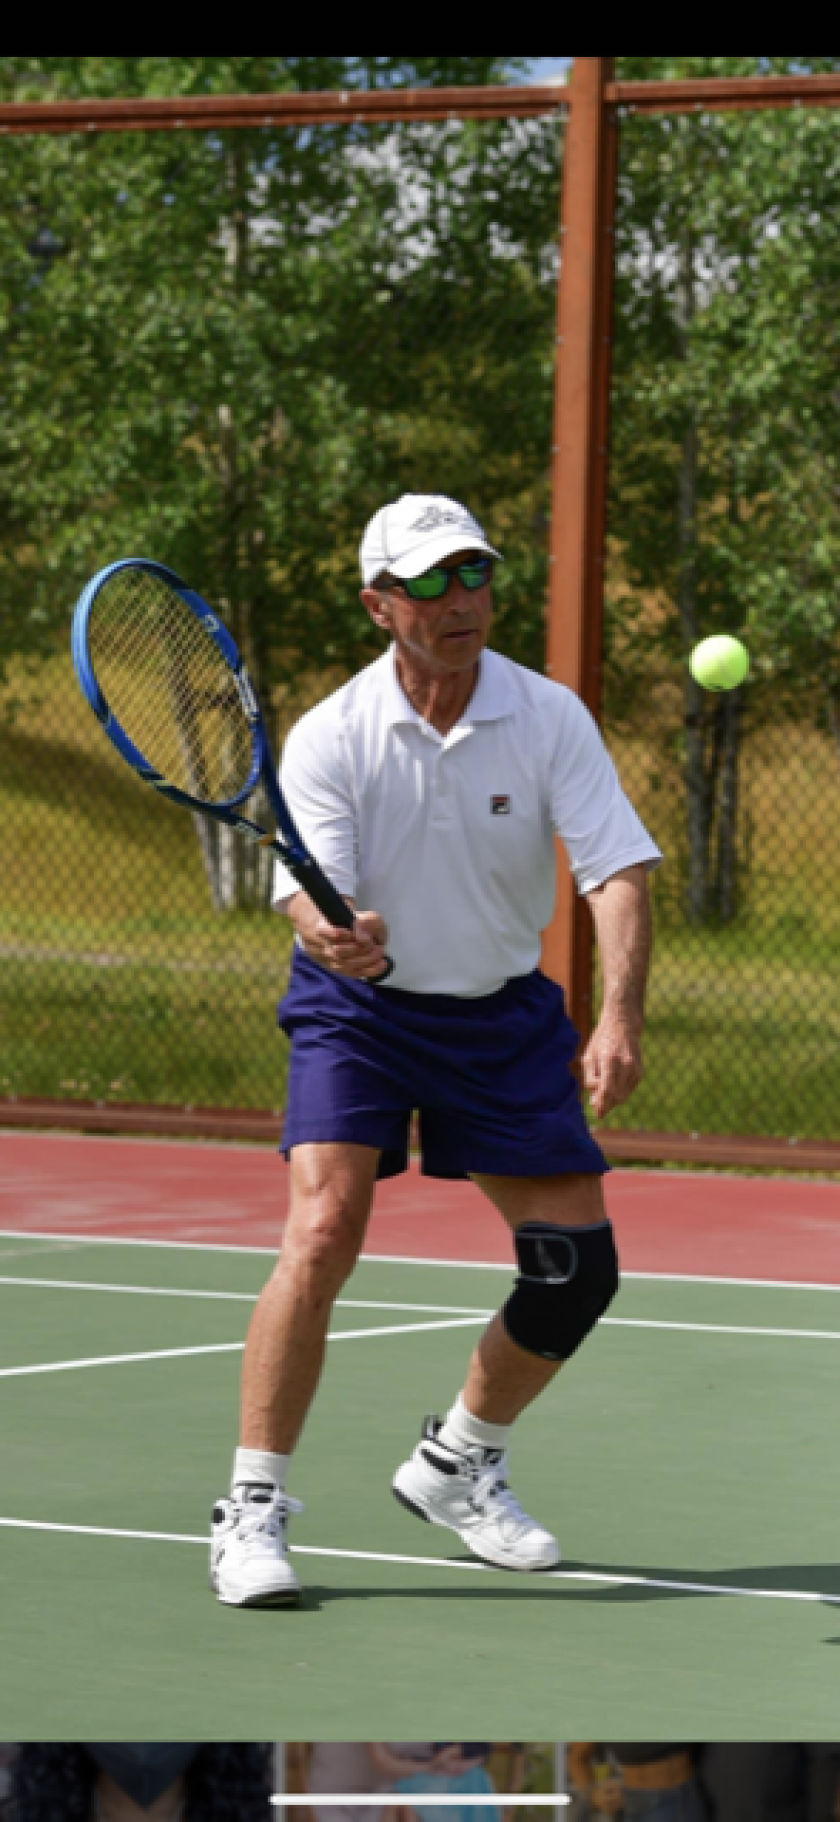 Former RSF resident Charles “Skeets” A. Dunn, Jr. playing tennis.